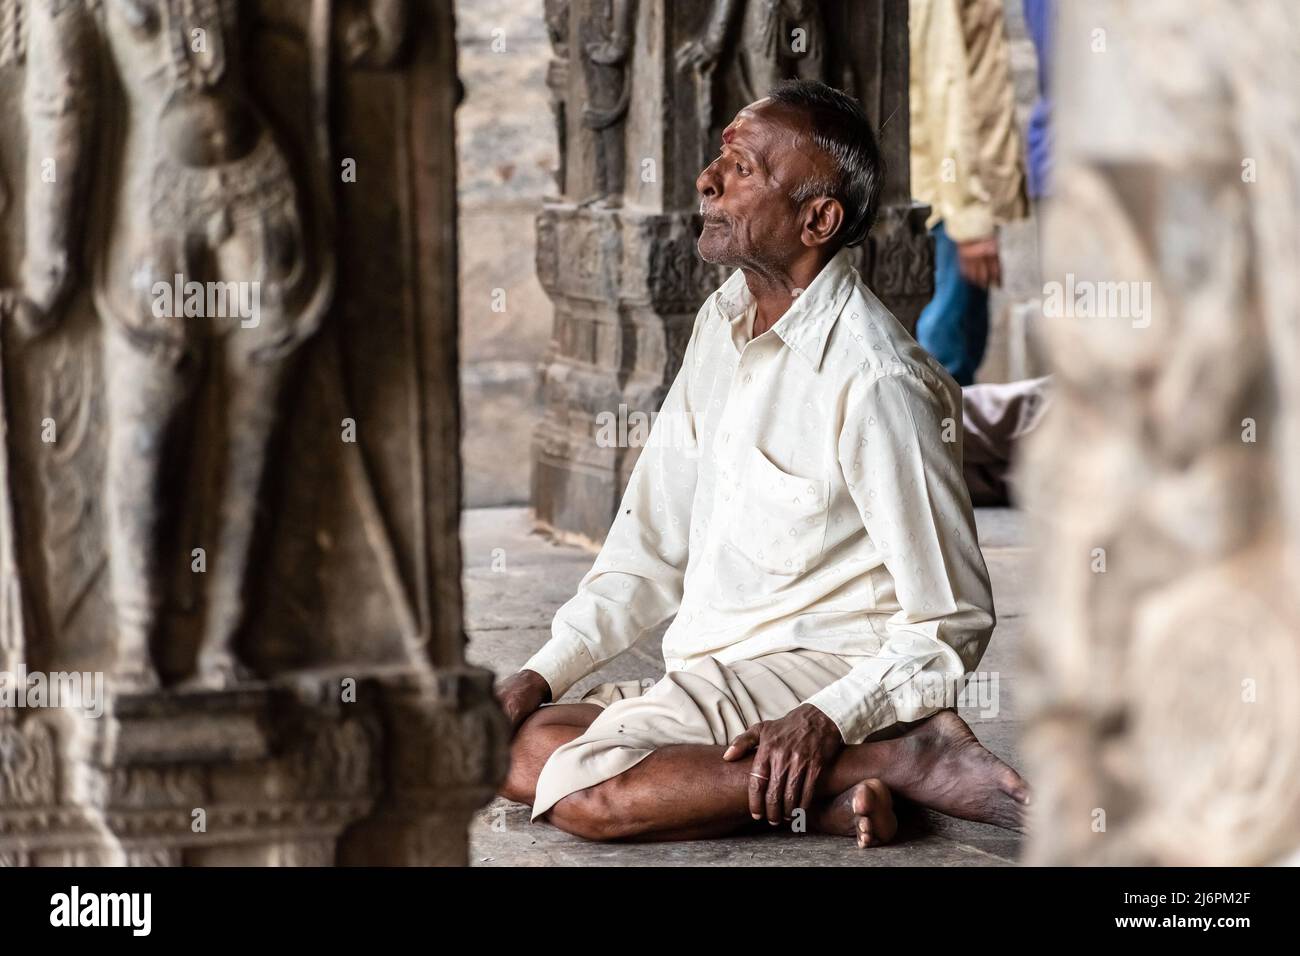 Vellore, Tamil Nadu, India - September 2018: An elderly Indian man sitting cross legged on the stone floor of an ancient Hindu temple in the Vellore F Stock Photo